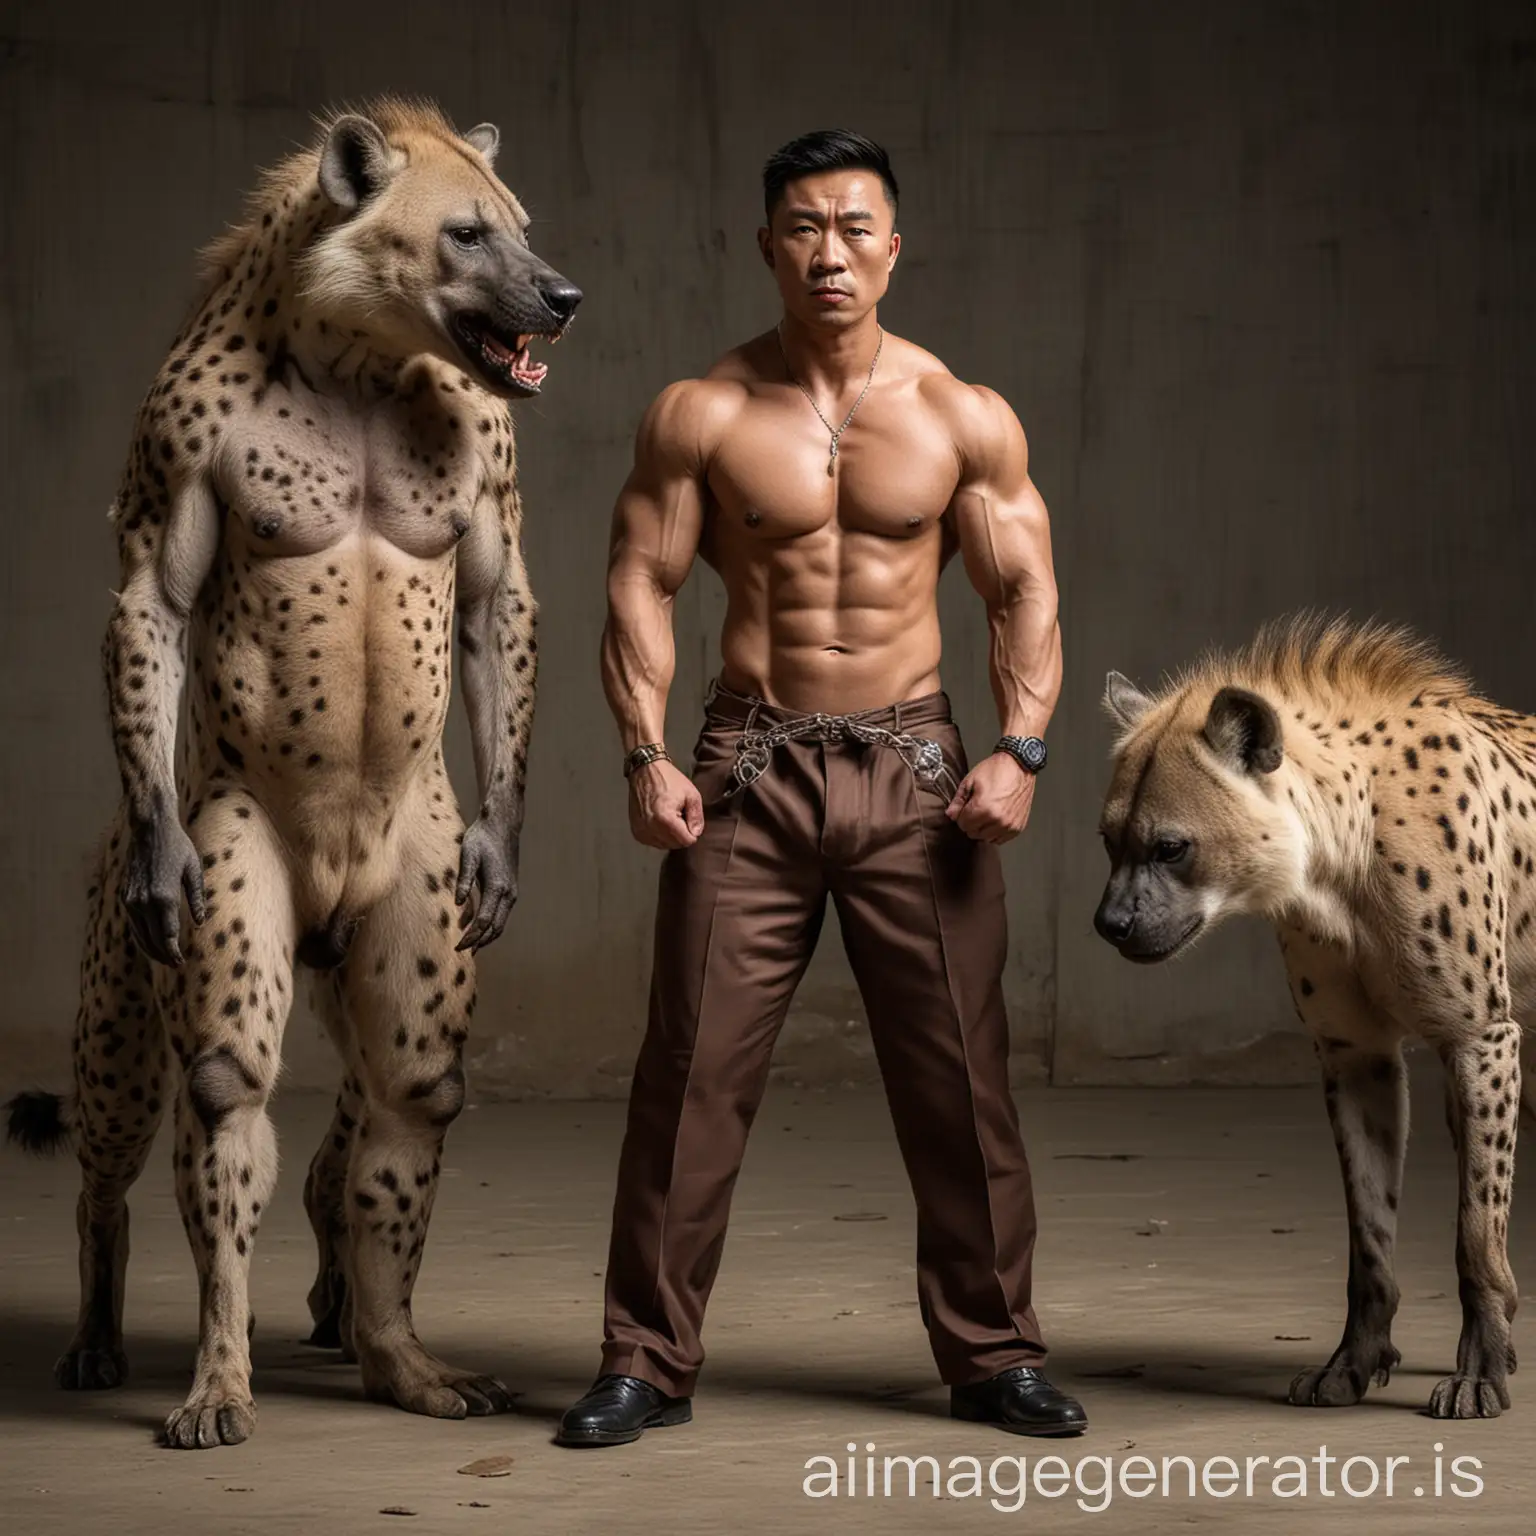 Chinese-Muscle-Man-Boss-Surrounded-by-Hyenas